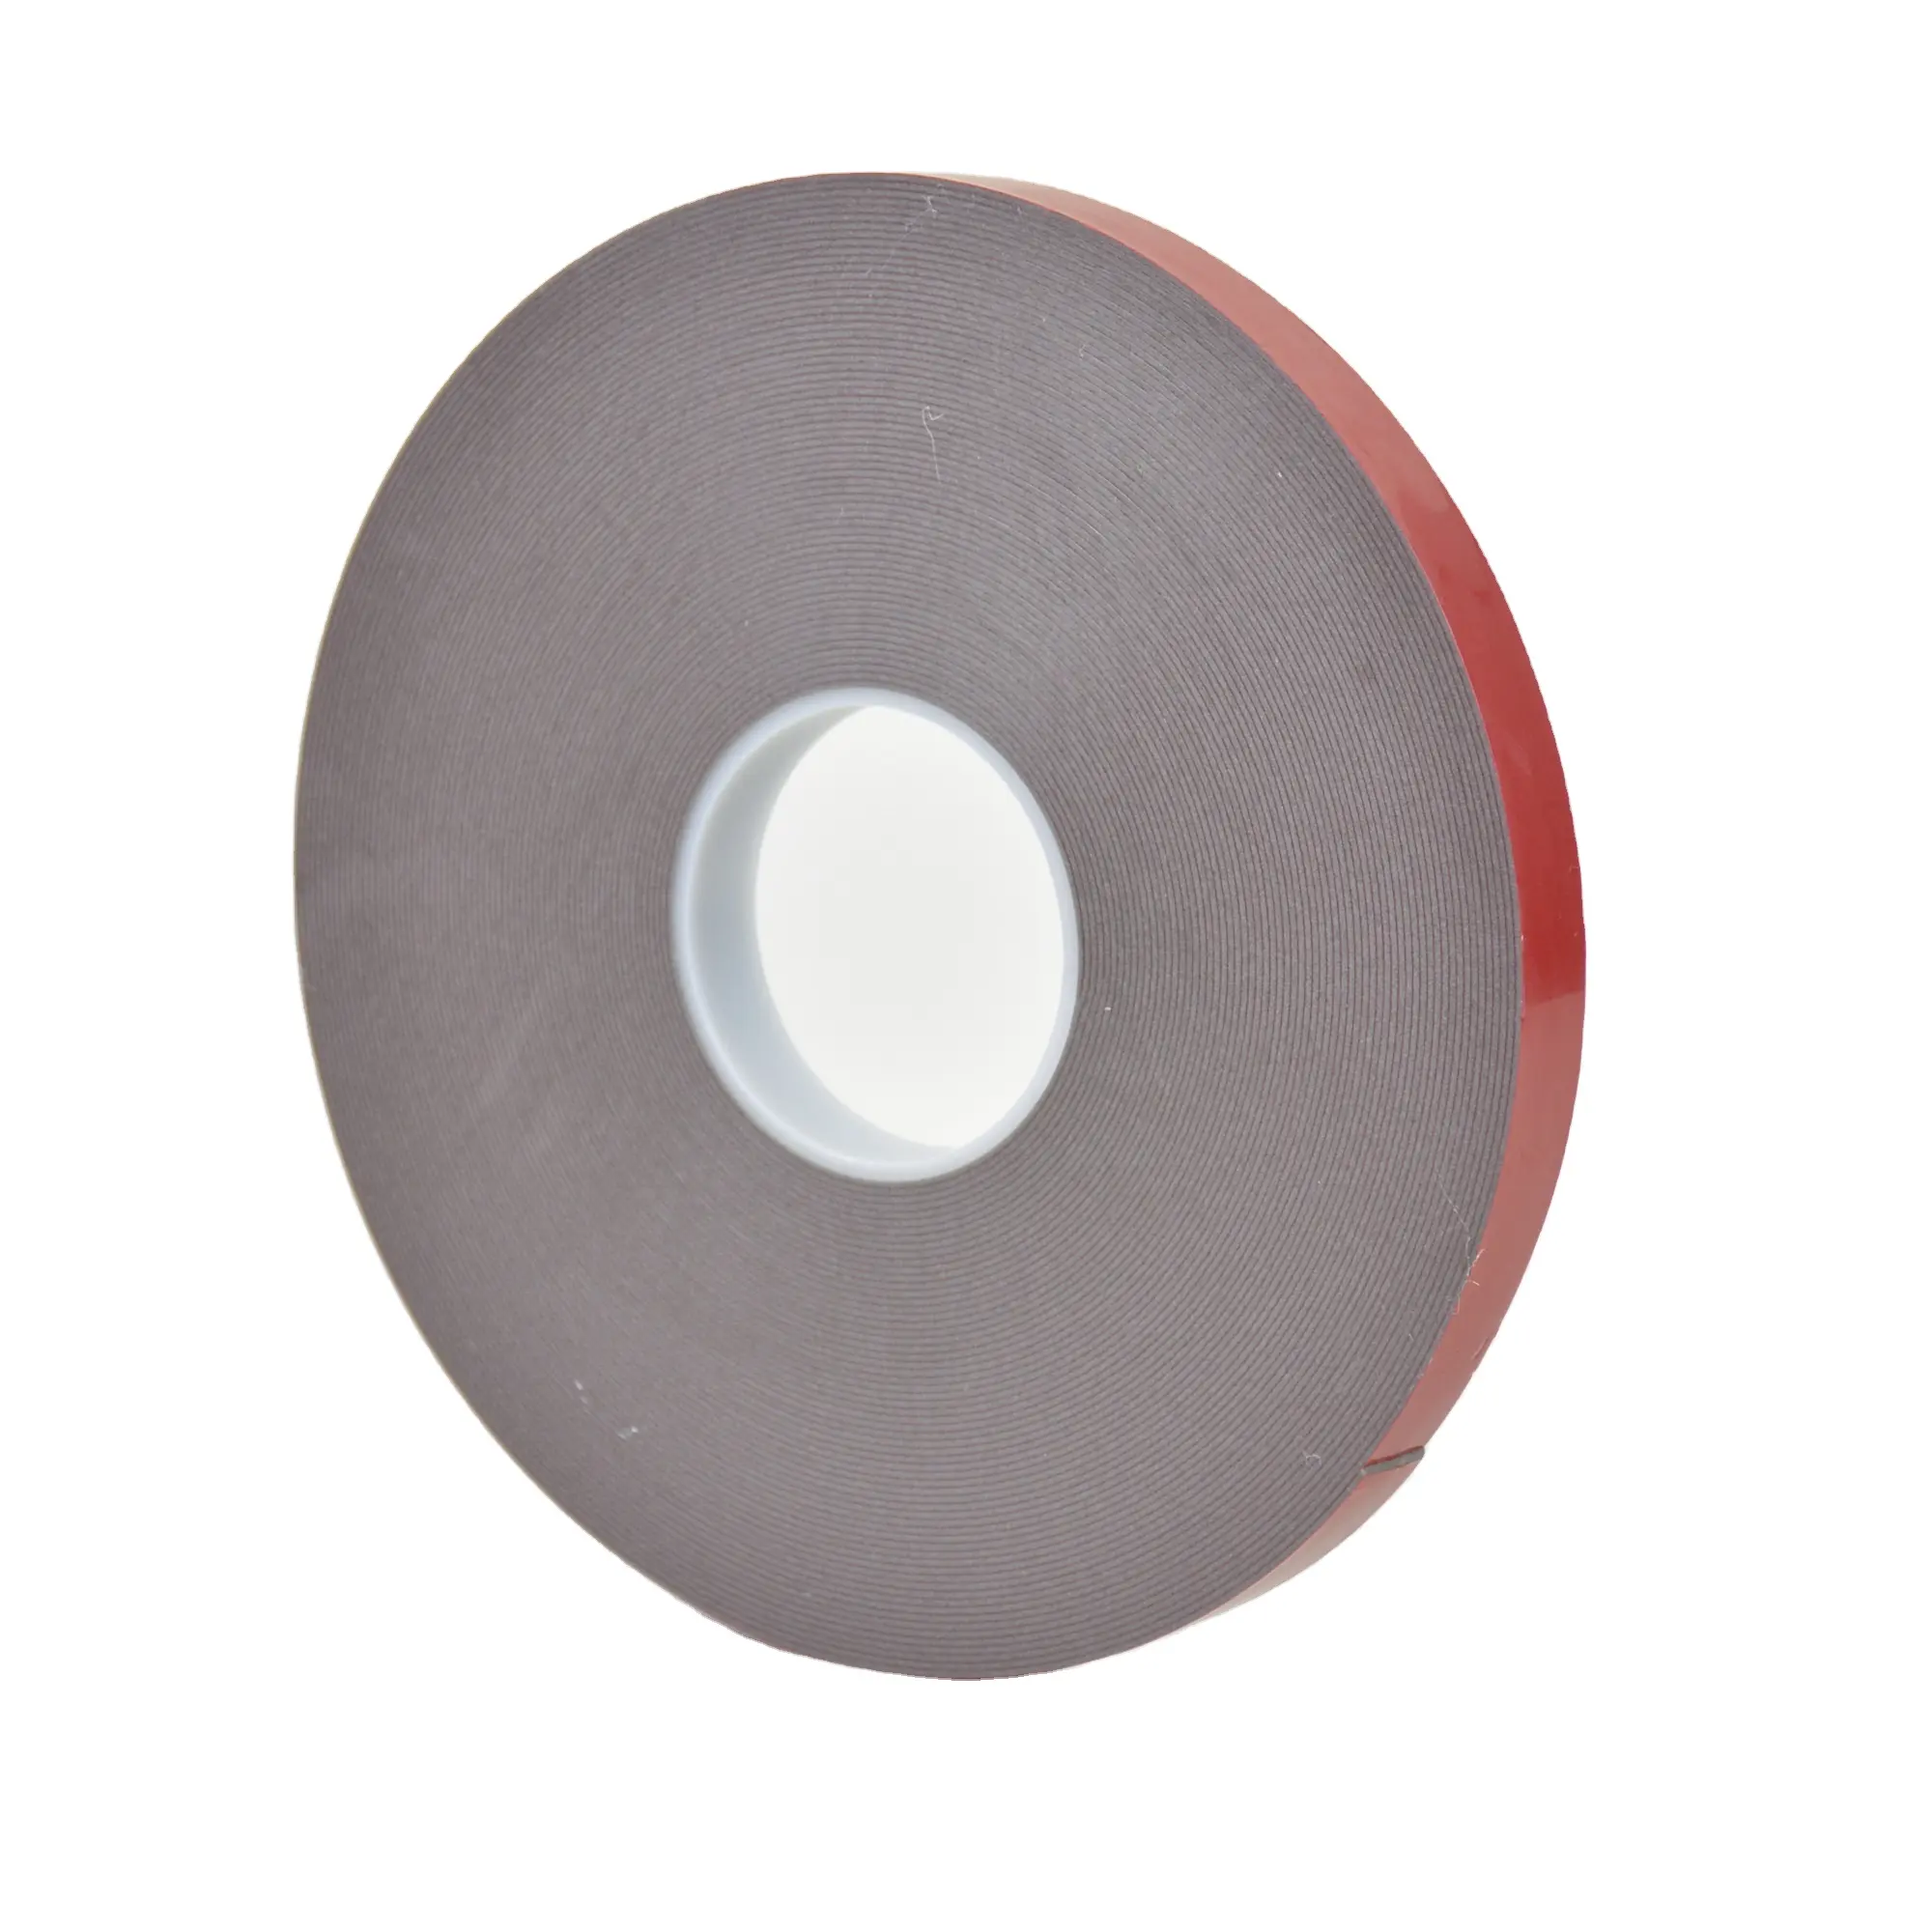 Double sided adhesive Tape